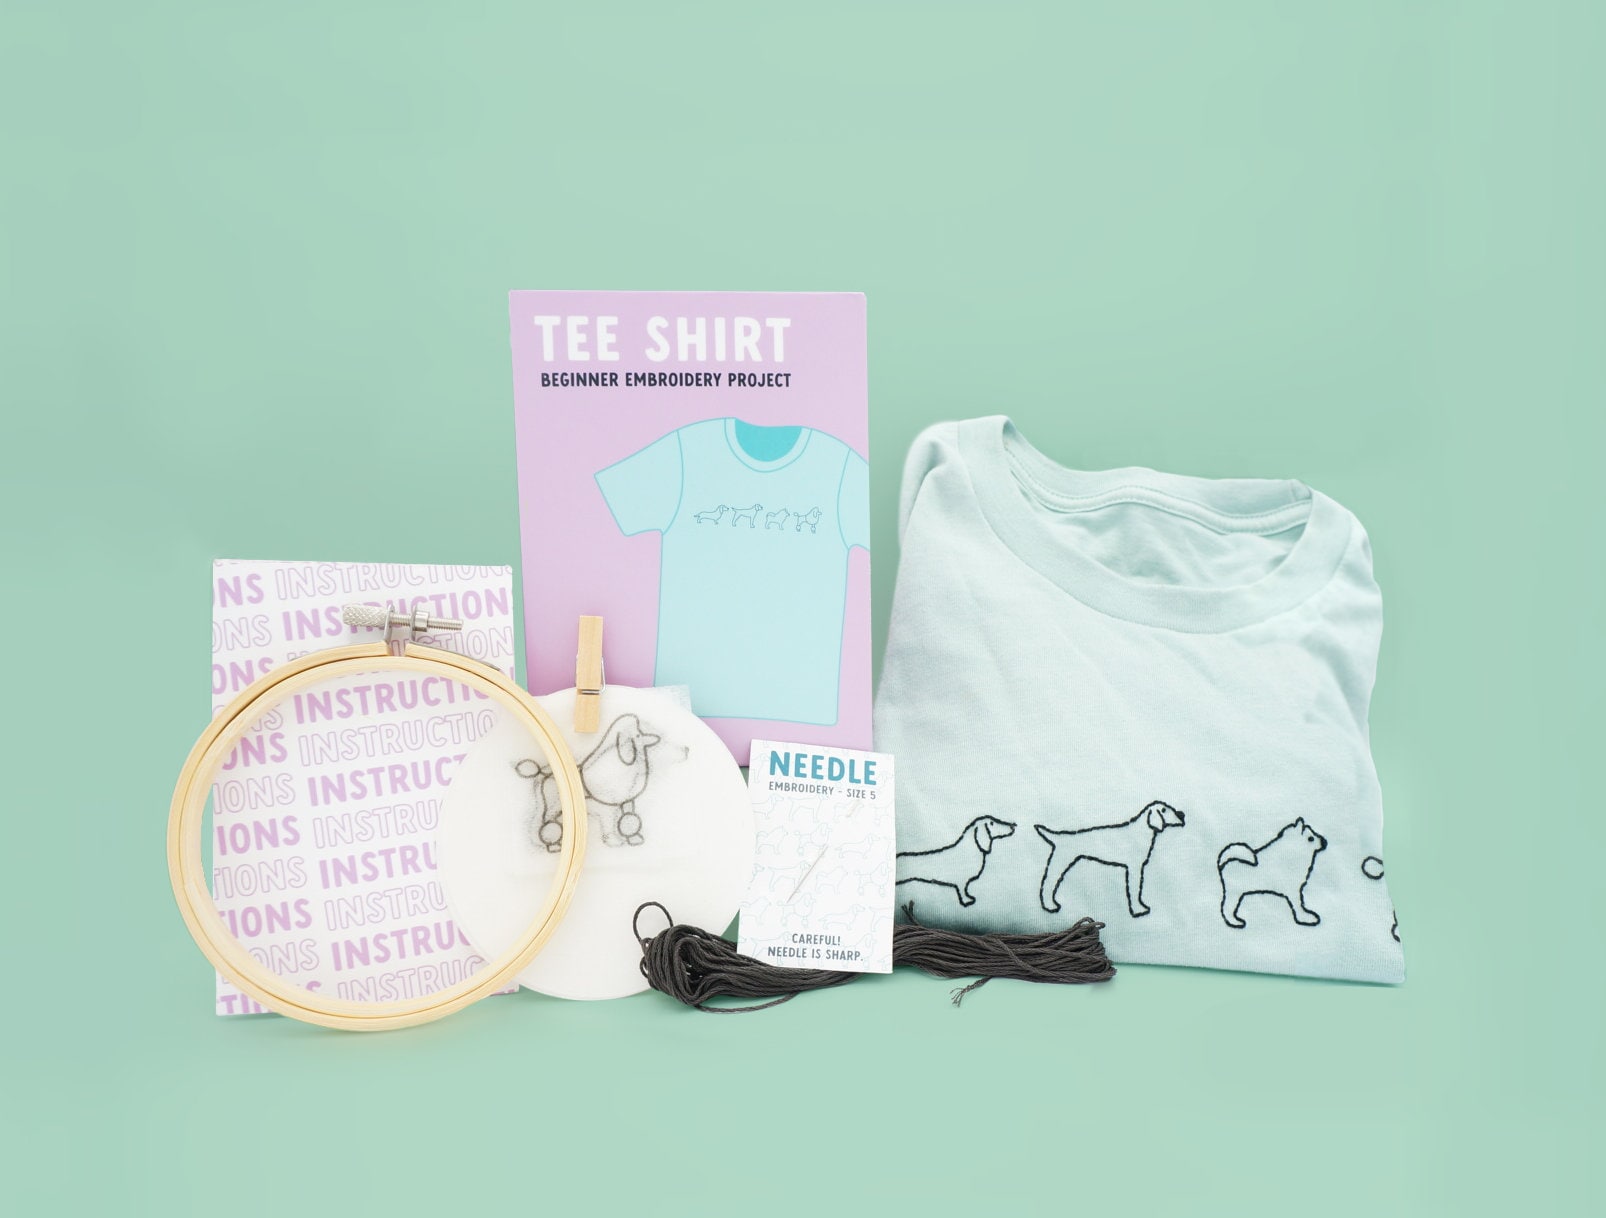 Learn to knit with this kit from Threadbook! This is the perfect